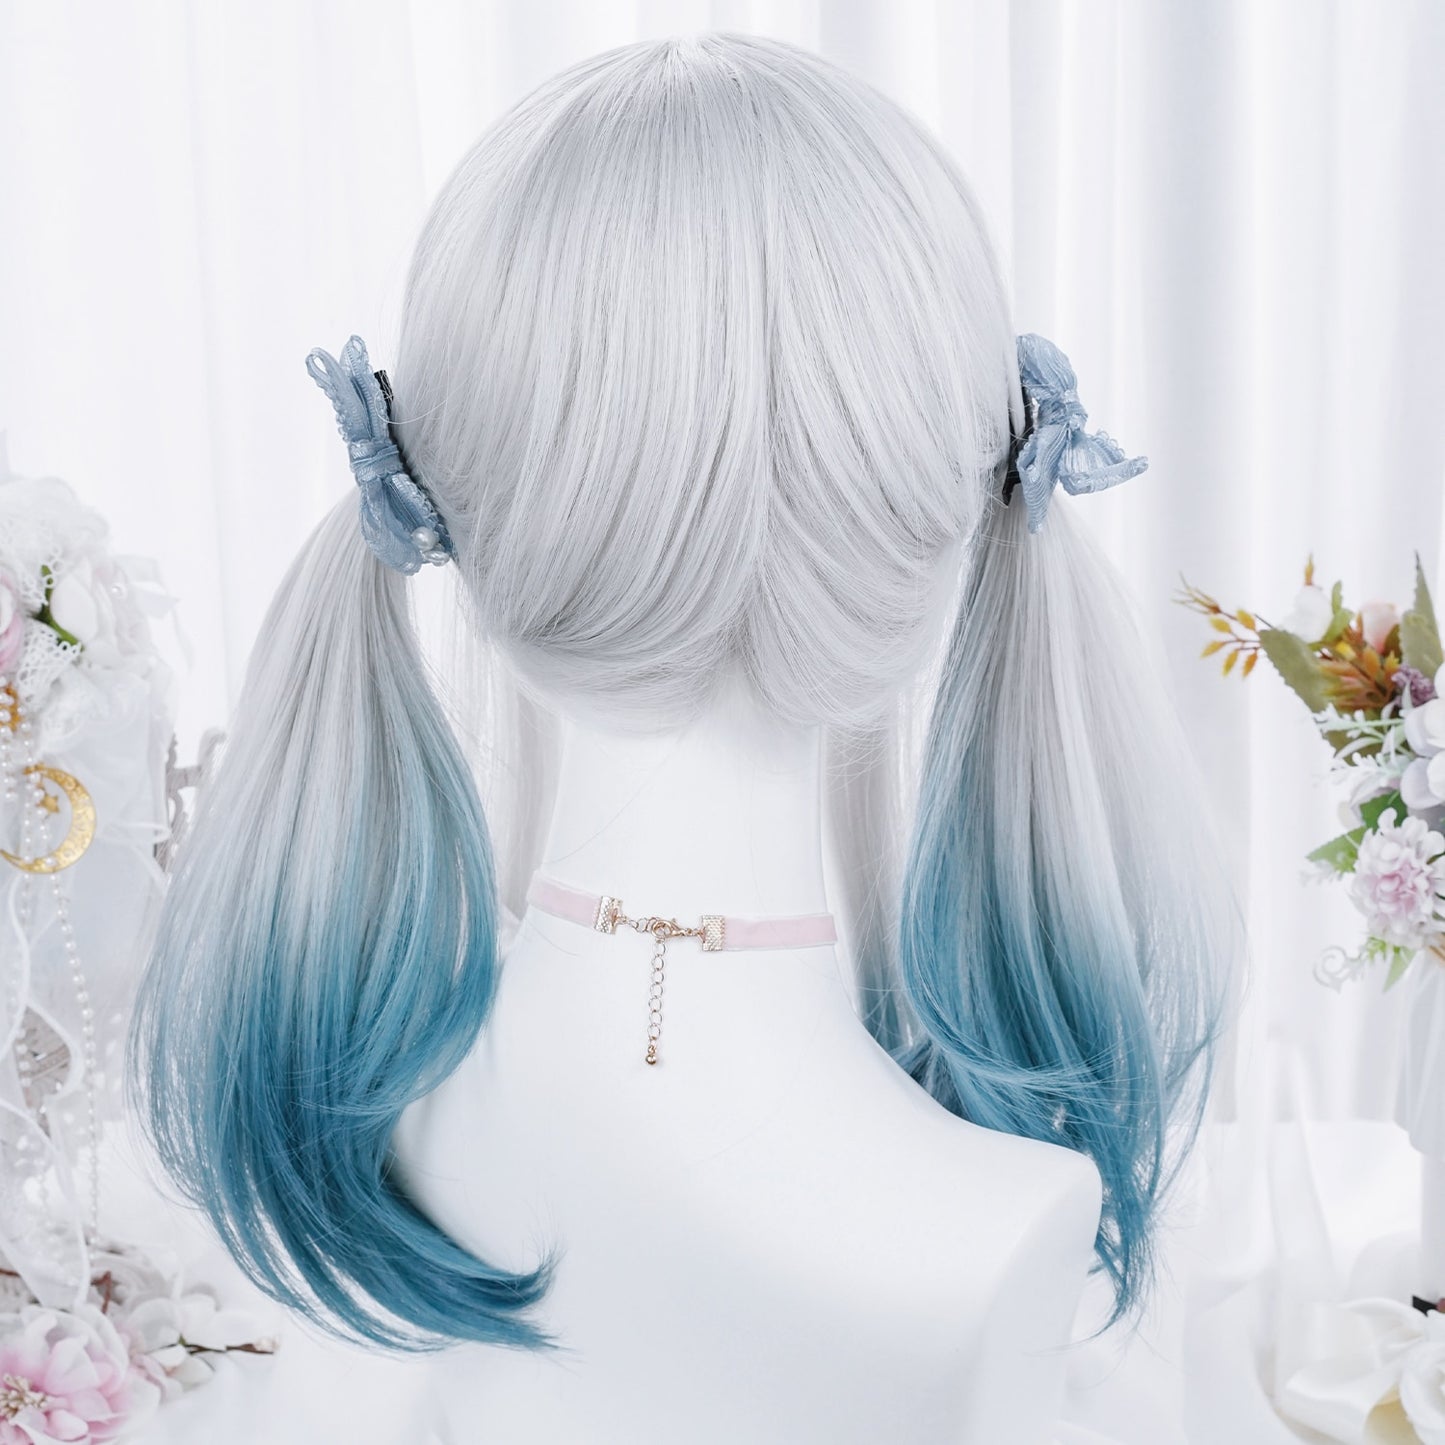 Women Synthetic Lolita Wig - Long Straight Two Tones Hair with Bangs